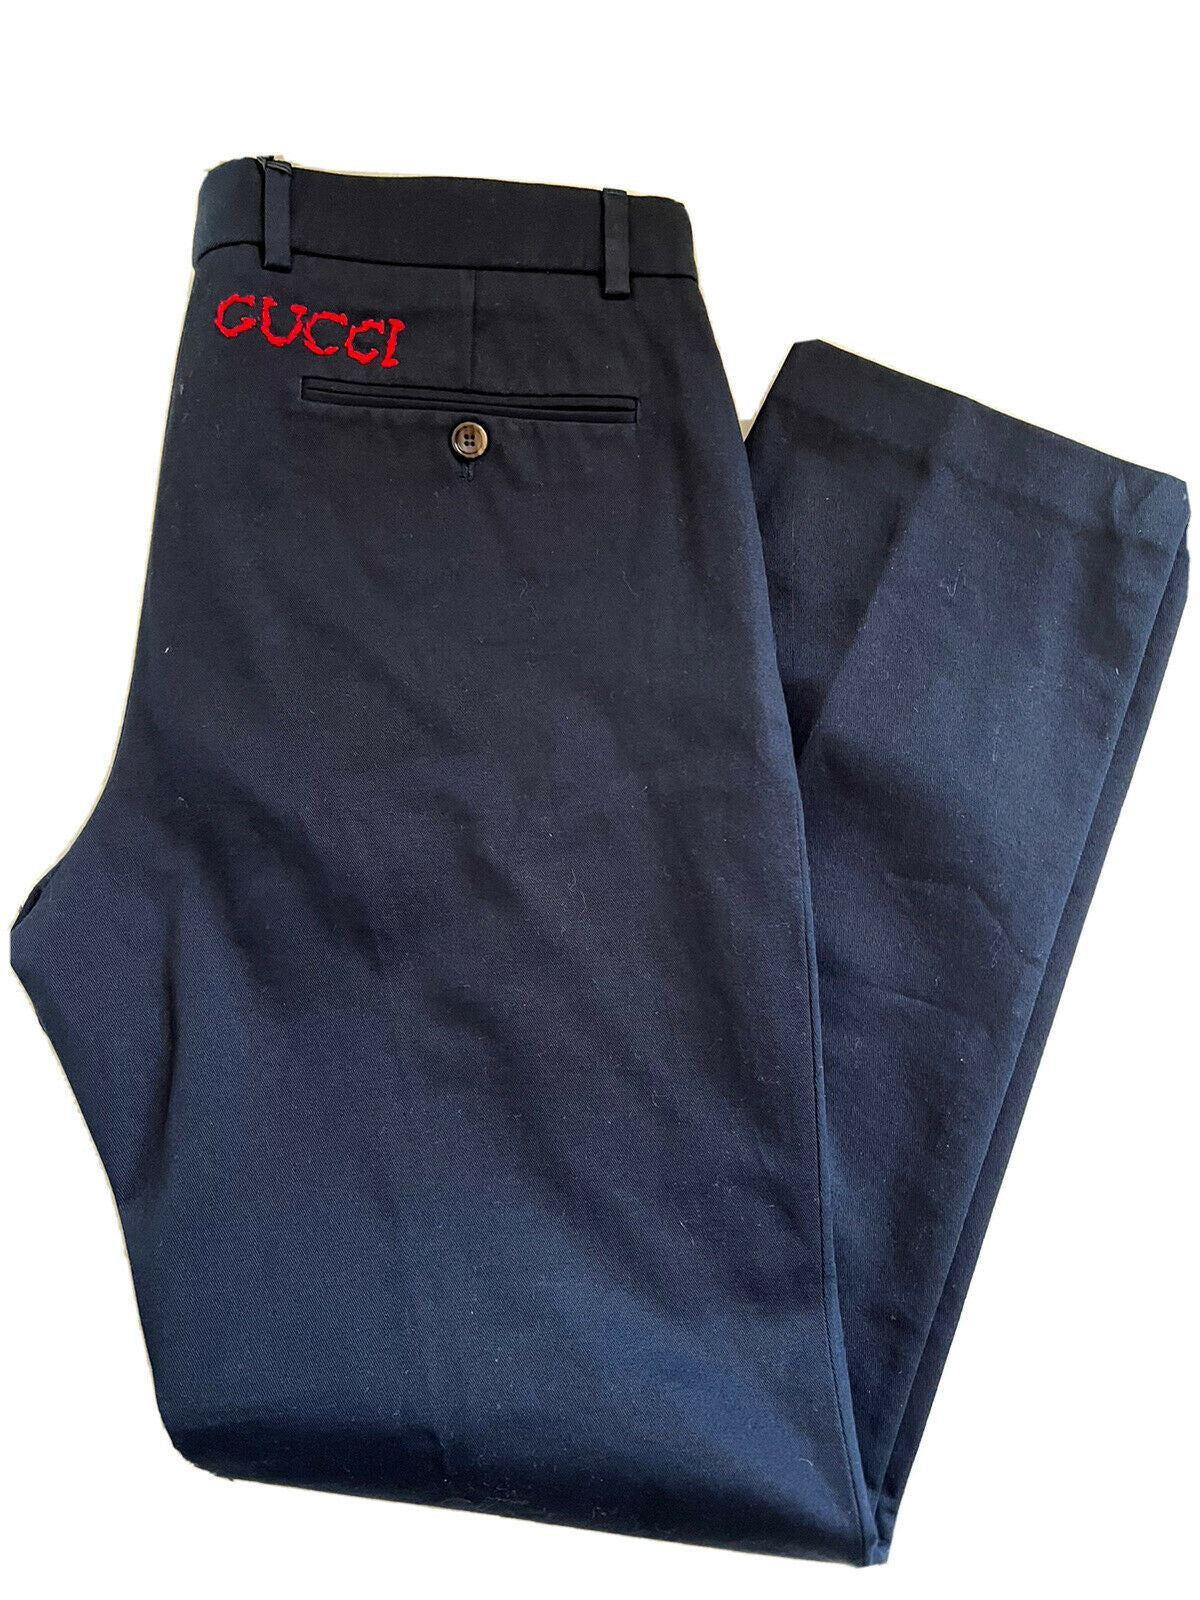 NWT Gucci Men's Blue Dress Pants 36 US (52 Euro) Made in Italy 519546